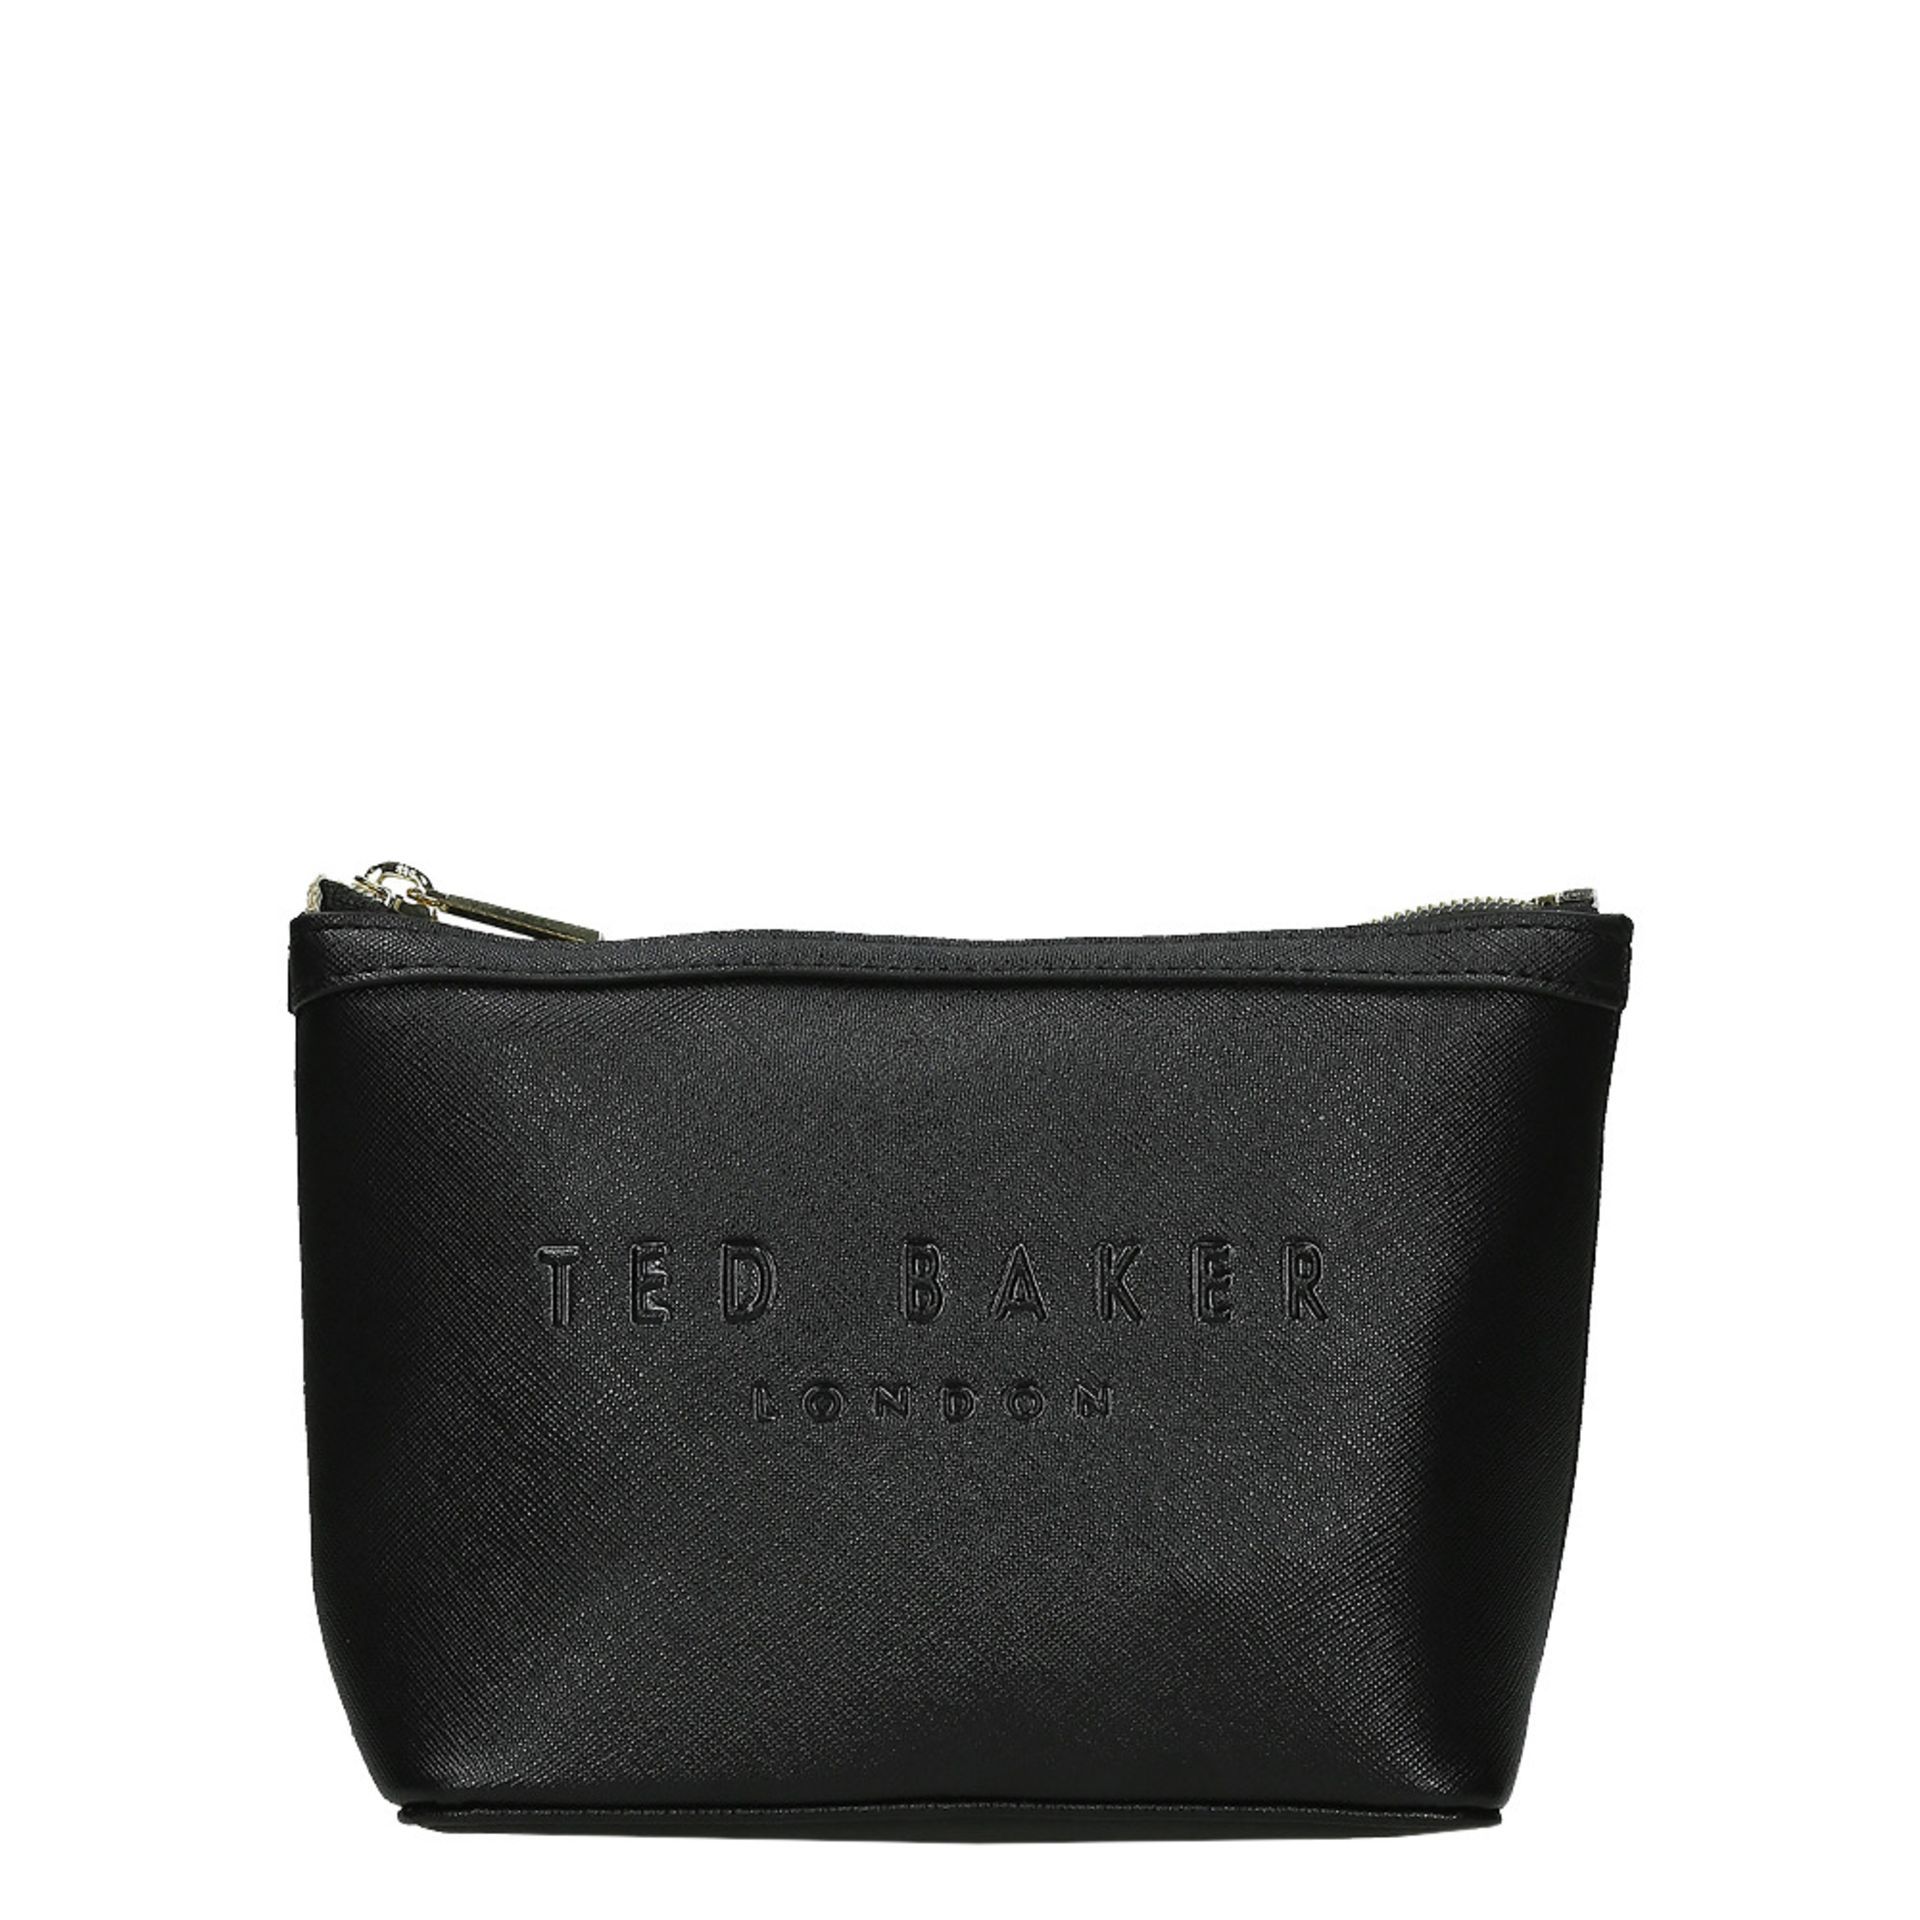 BRAND NEW TED BAKER NEEVIE TRAPEZE BLACK MAKEUP BAG (0619) RRP £40 (340/27)